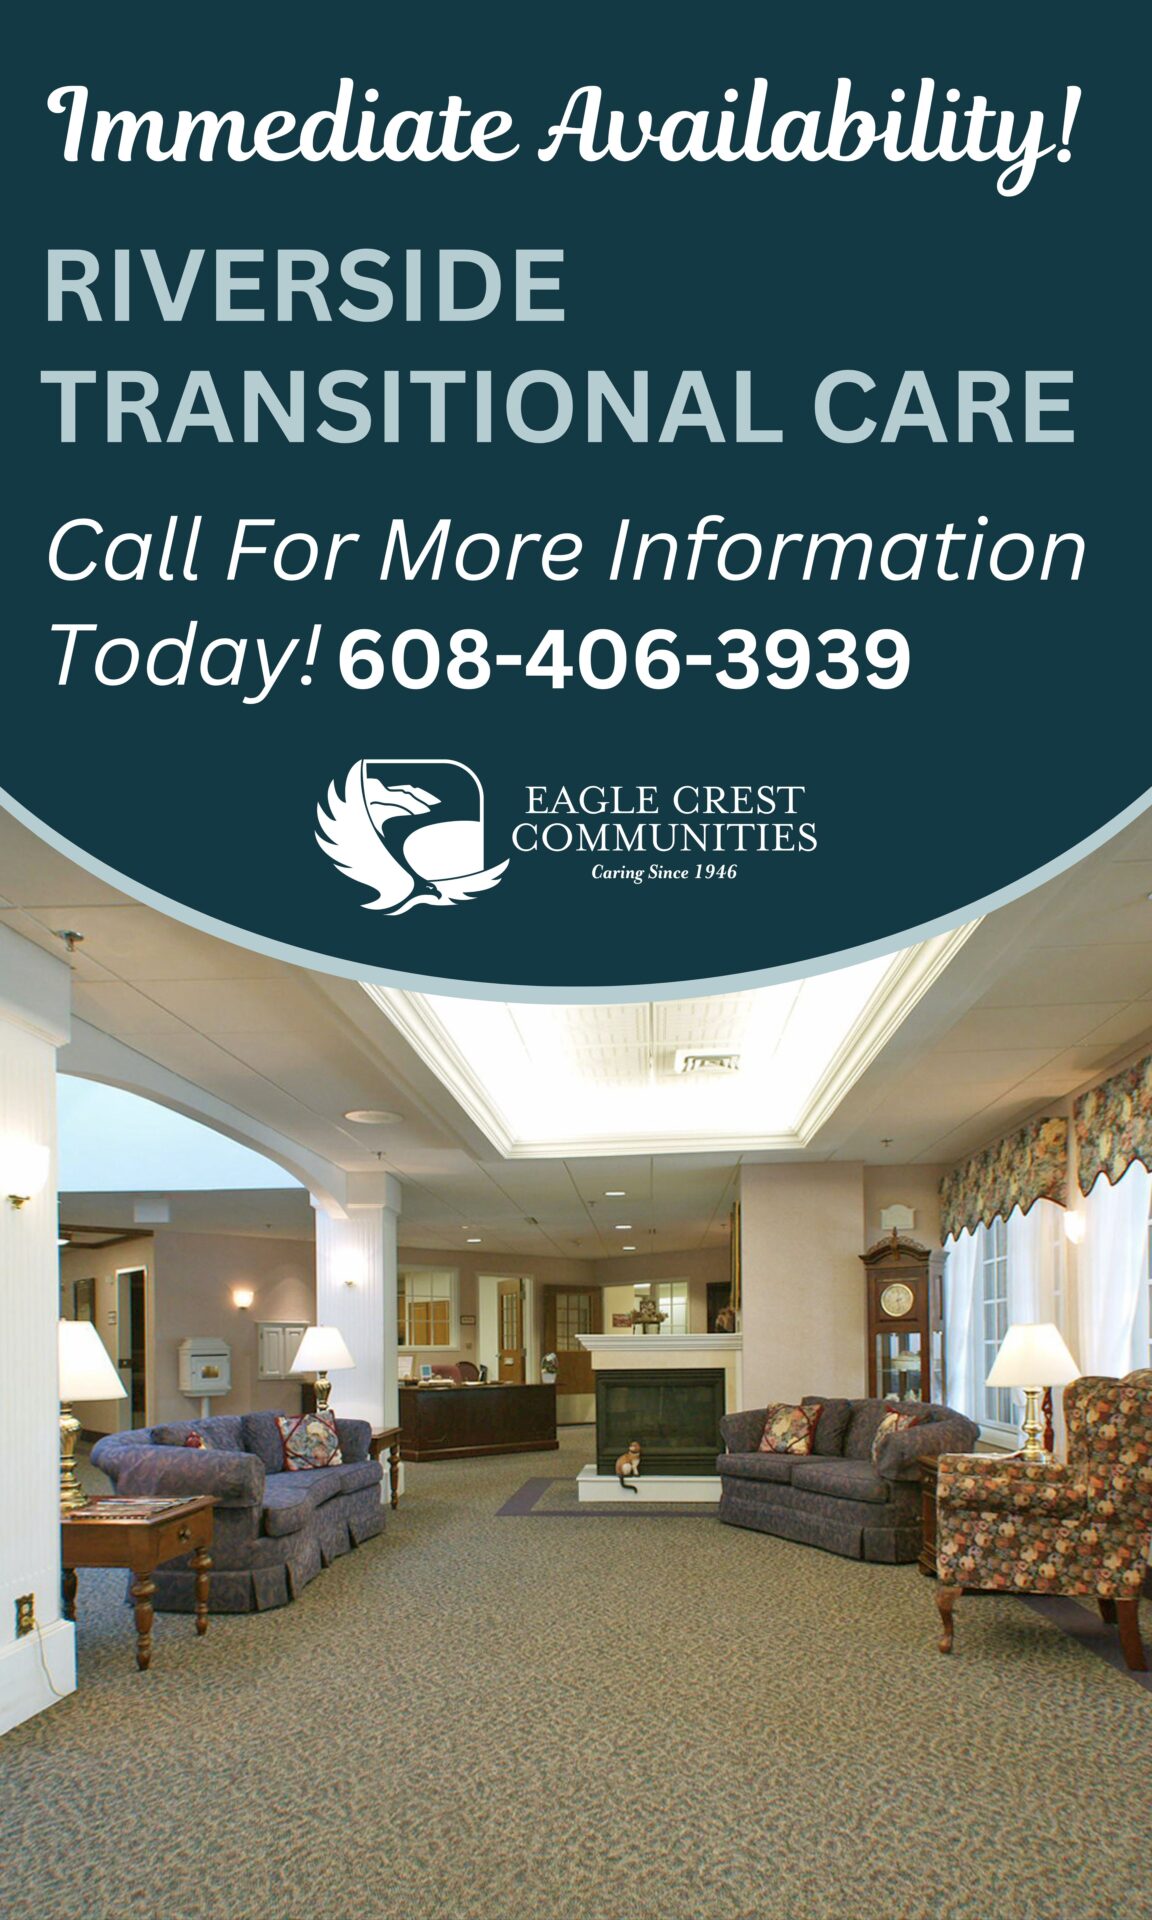 Riverside Transitional Care has current availablity. Please call 608-404-3939 for more information. *Picture of main lobby at Riverside with seating and fireplace. 